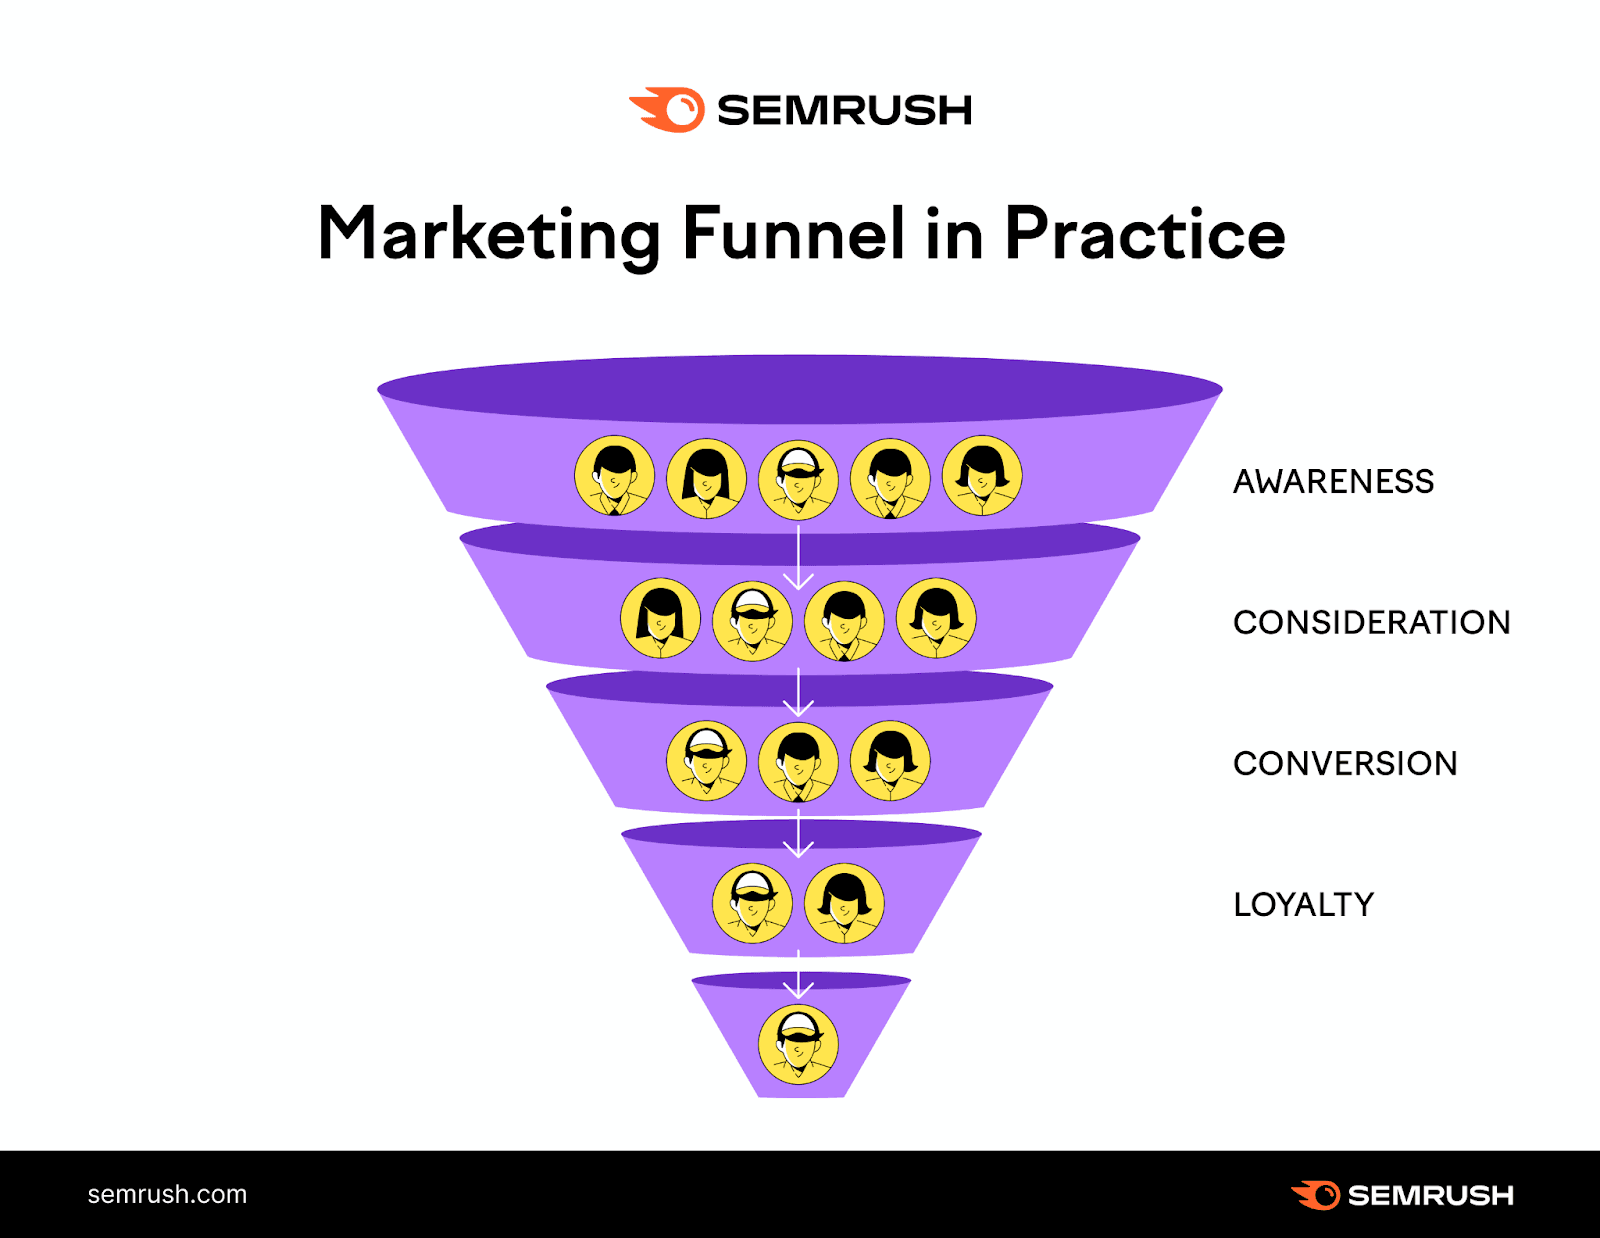 The marketing funnel in action